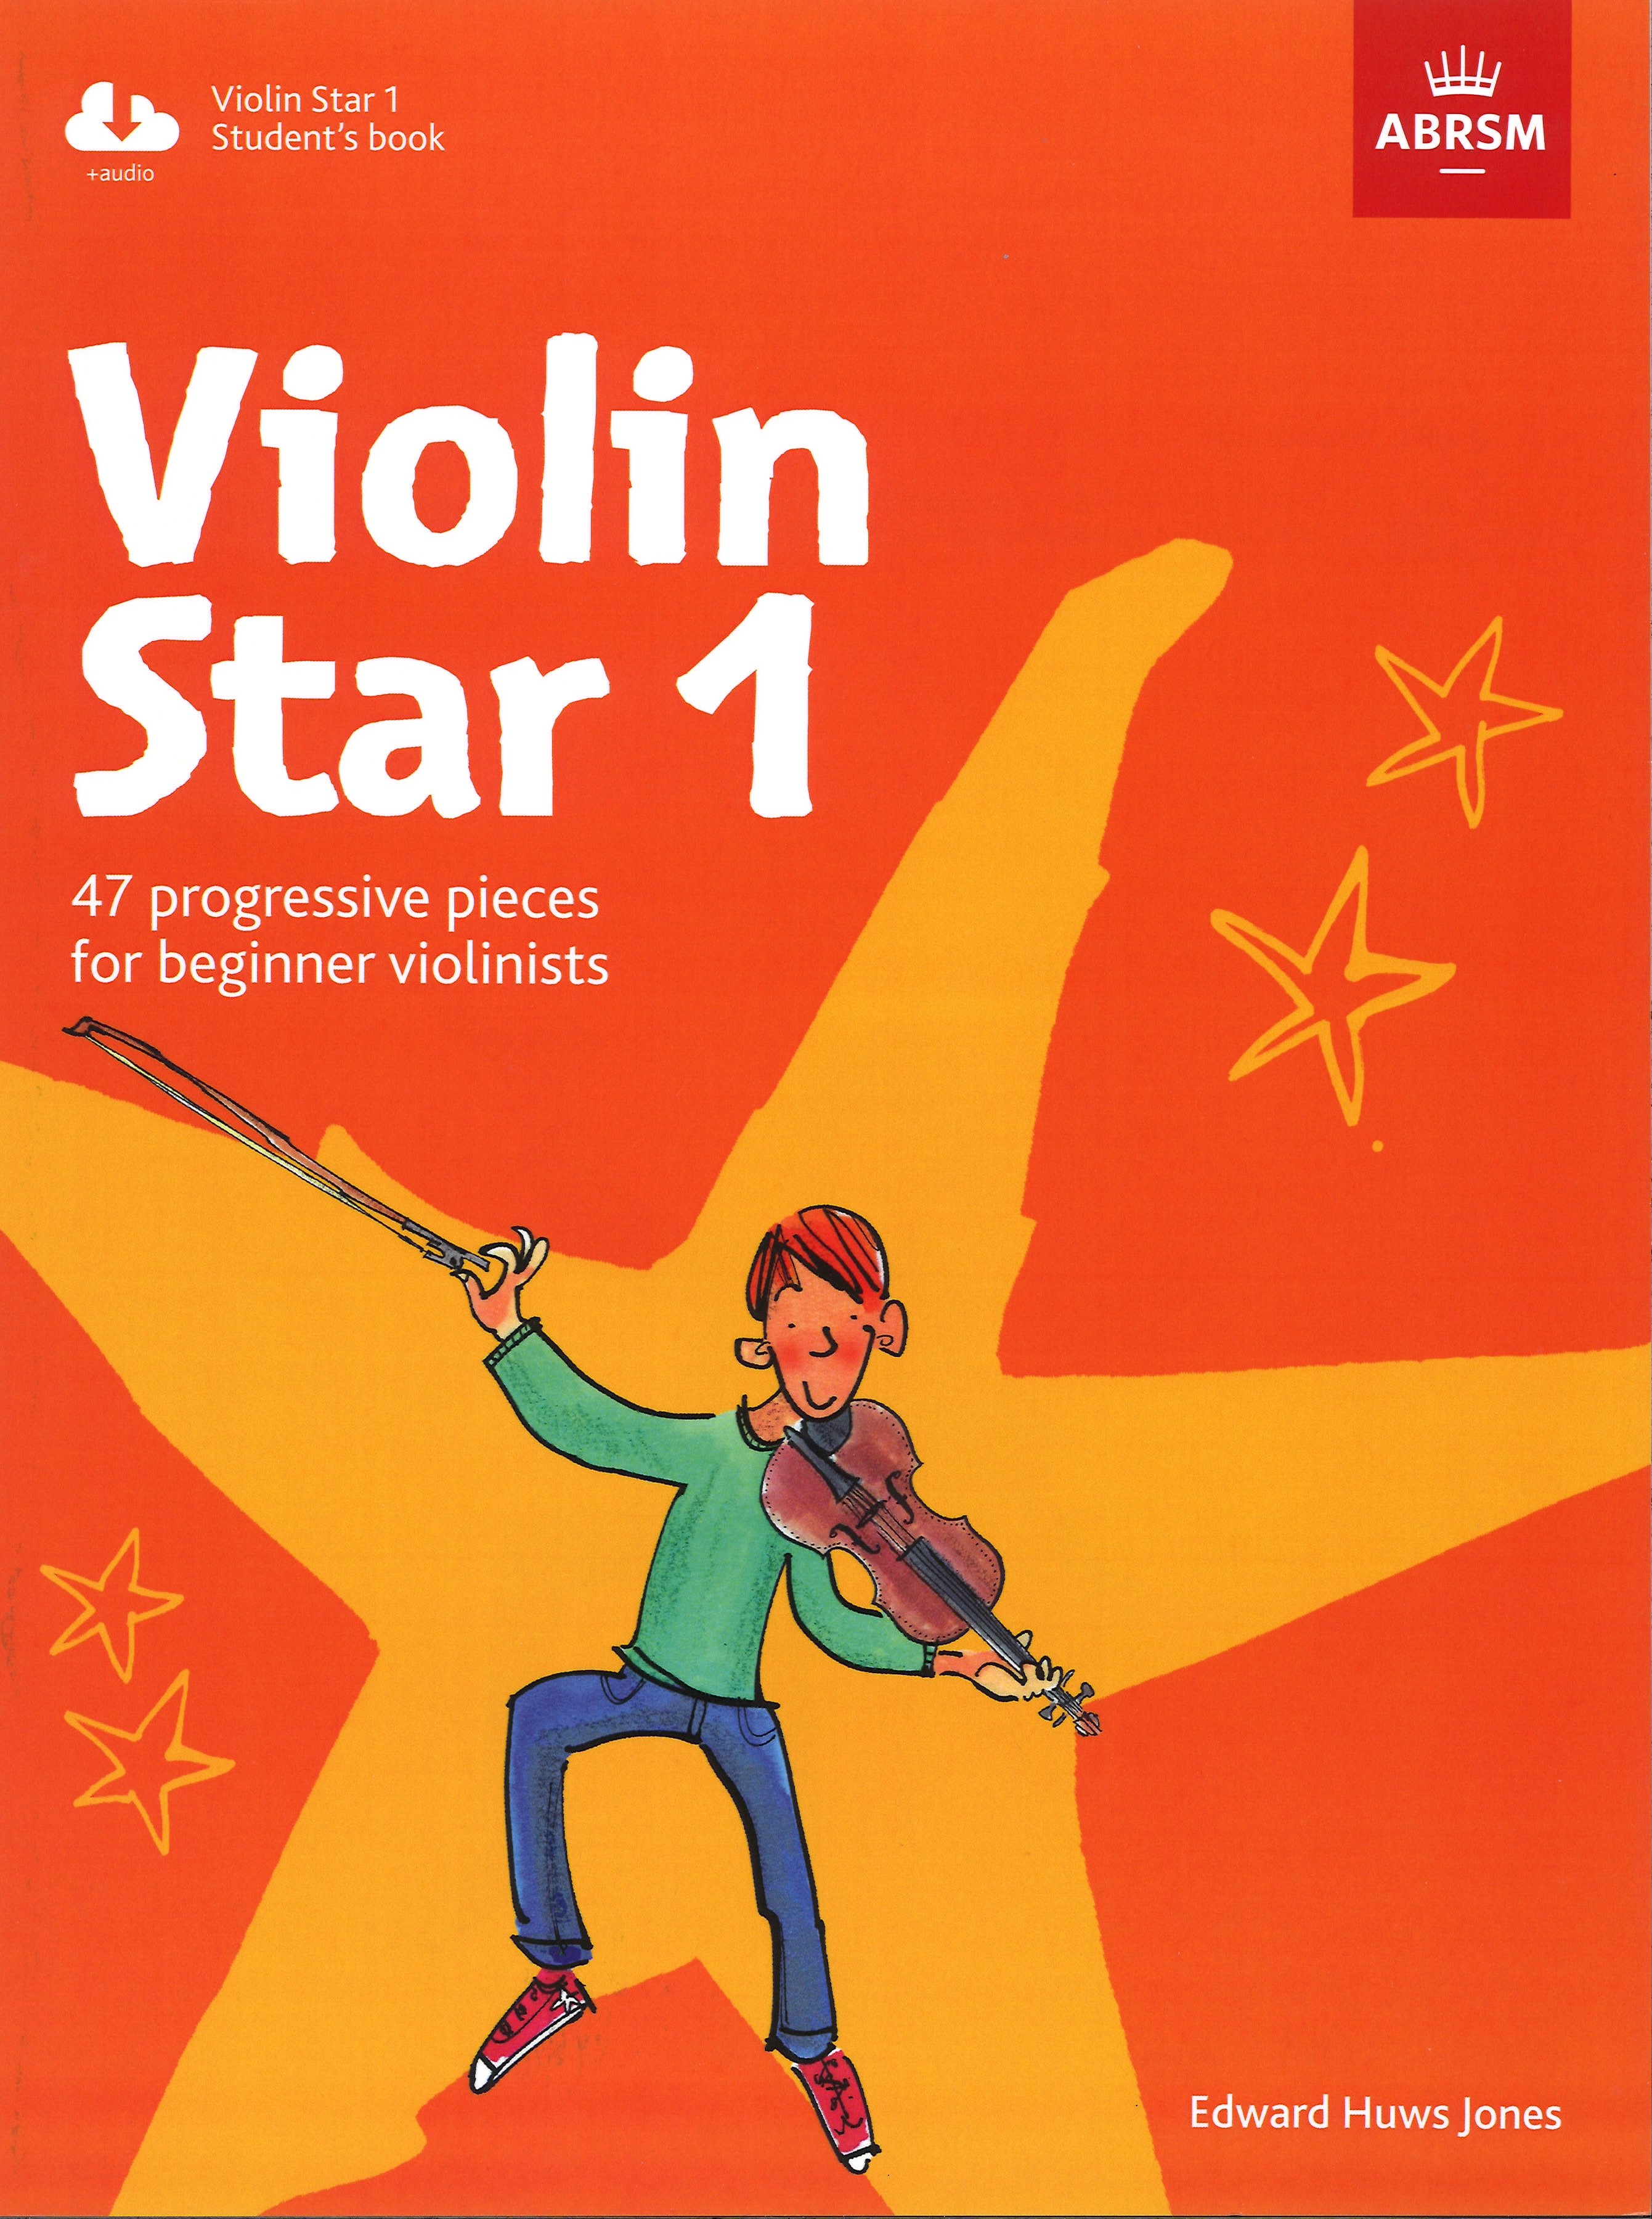 Violin Star 1 Students Book & Audio Abrsm Sheet Music Songbook